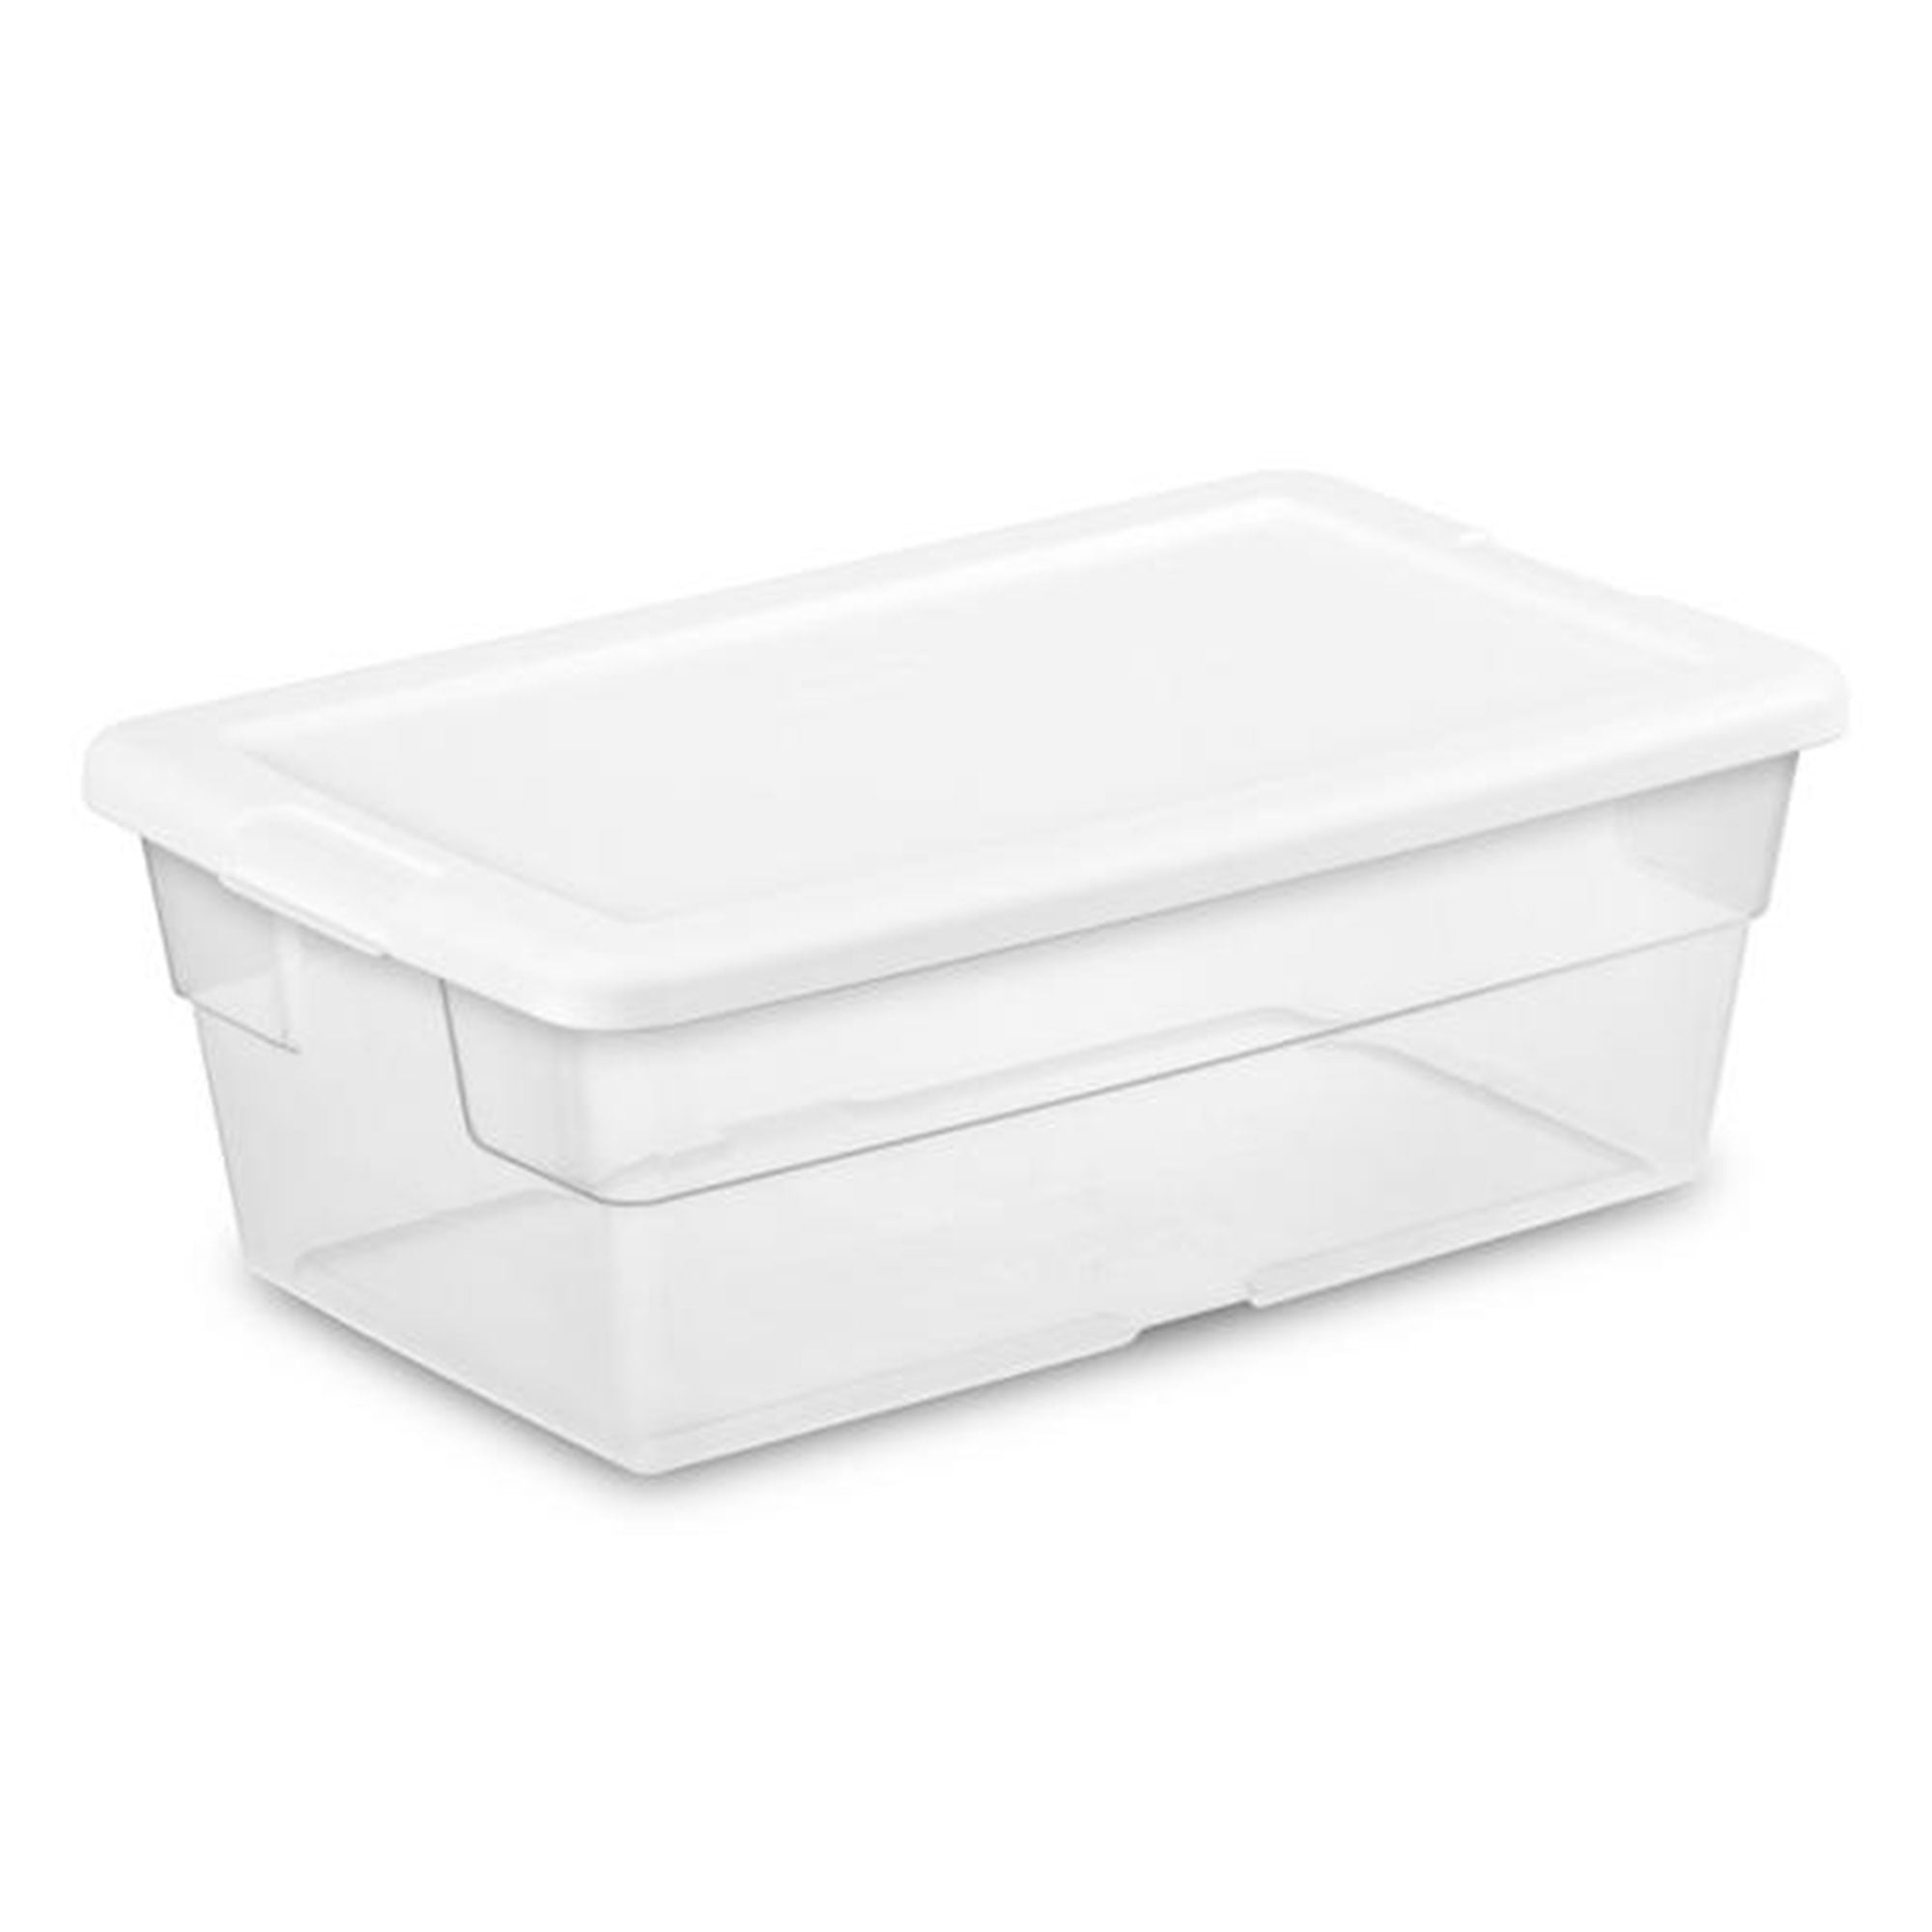 Kekow 70 L Clear Large Storage Box, Plastic Latch Box with Wheels, 4-Pack